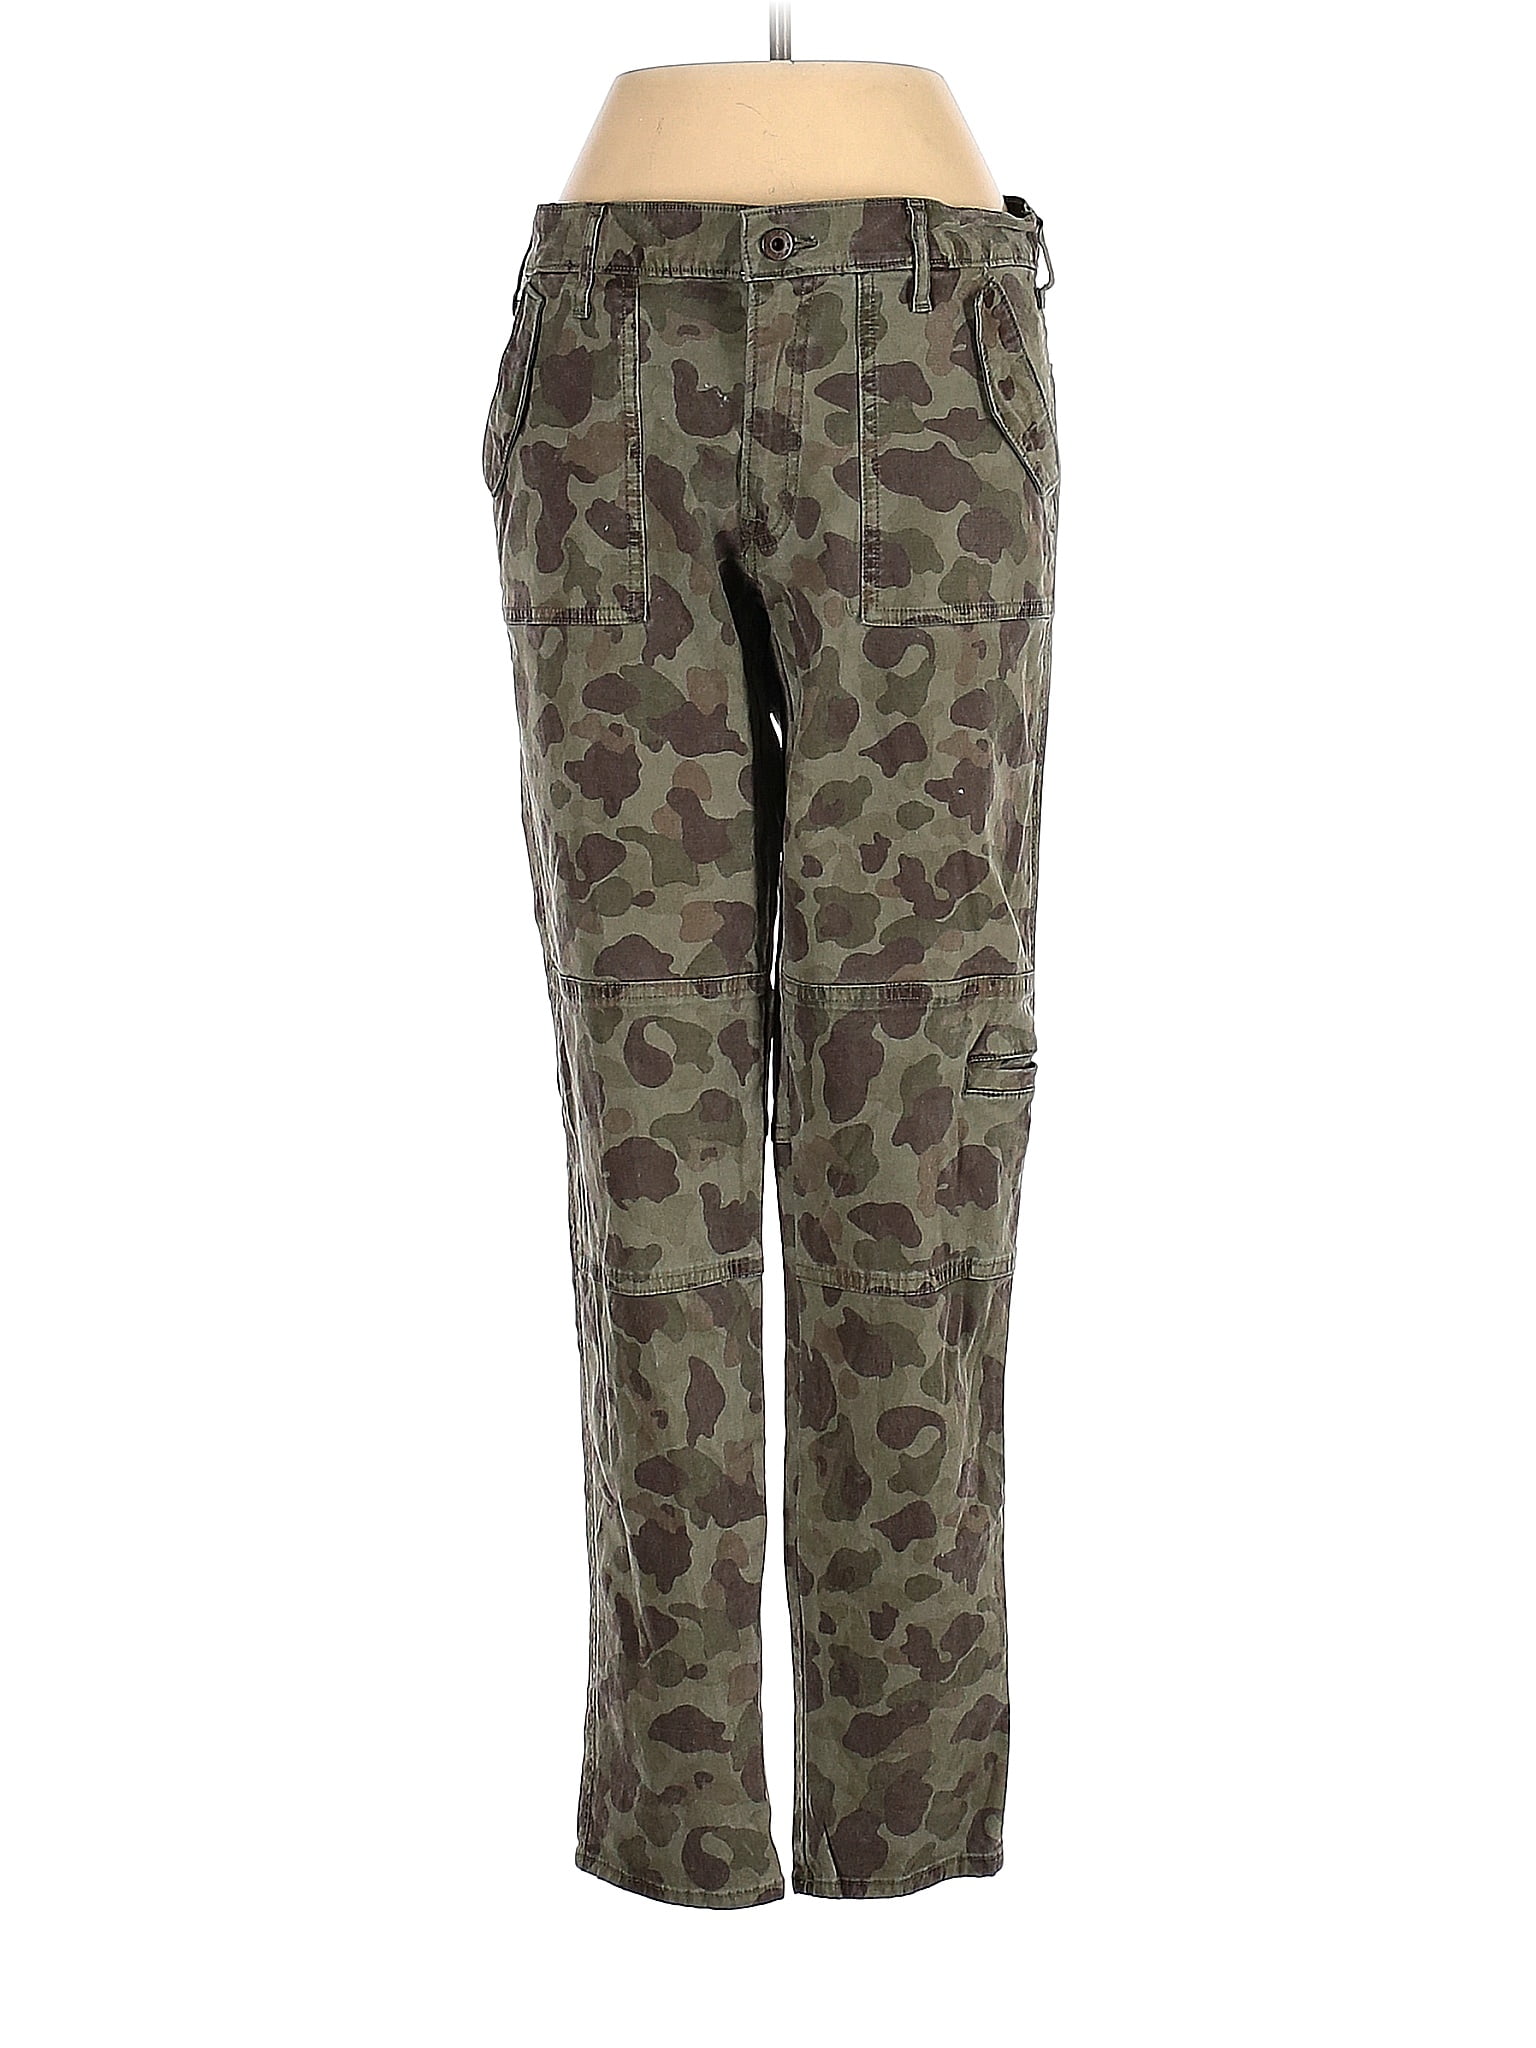 Lucky Brand Camo Green Jeans Size 2 - 87% off | thredUP